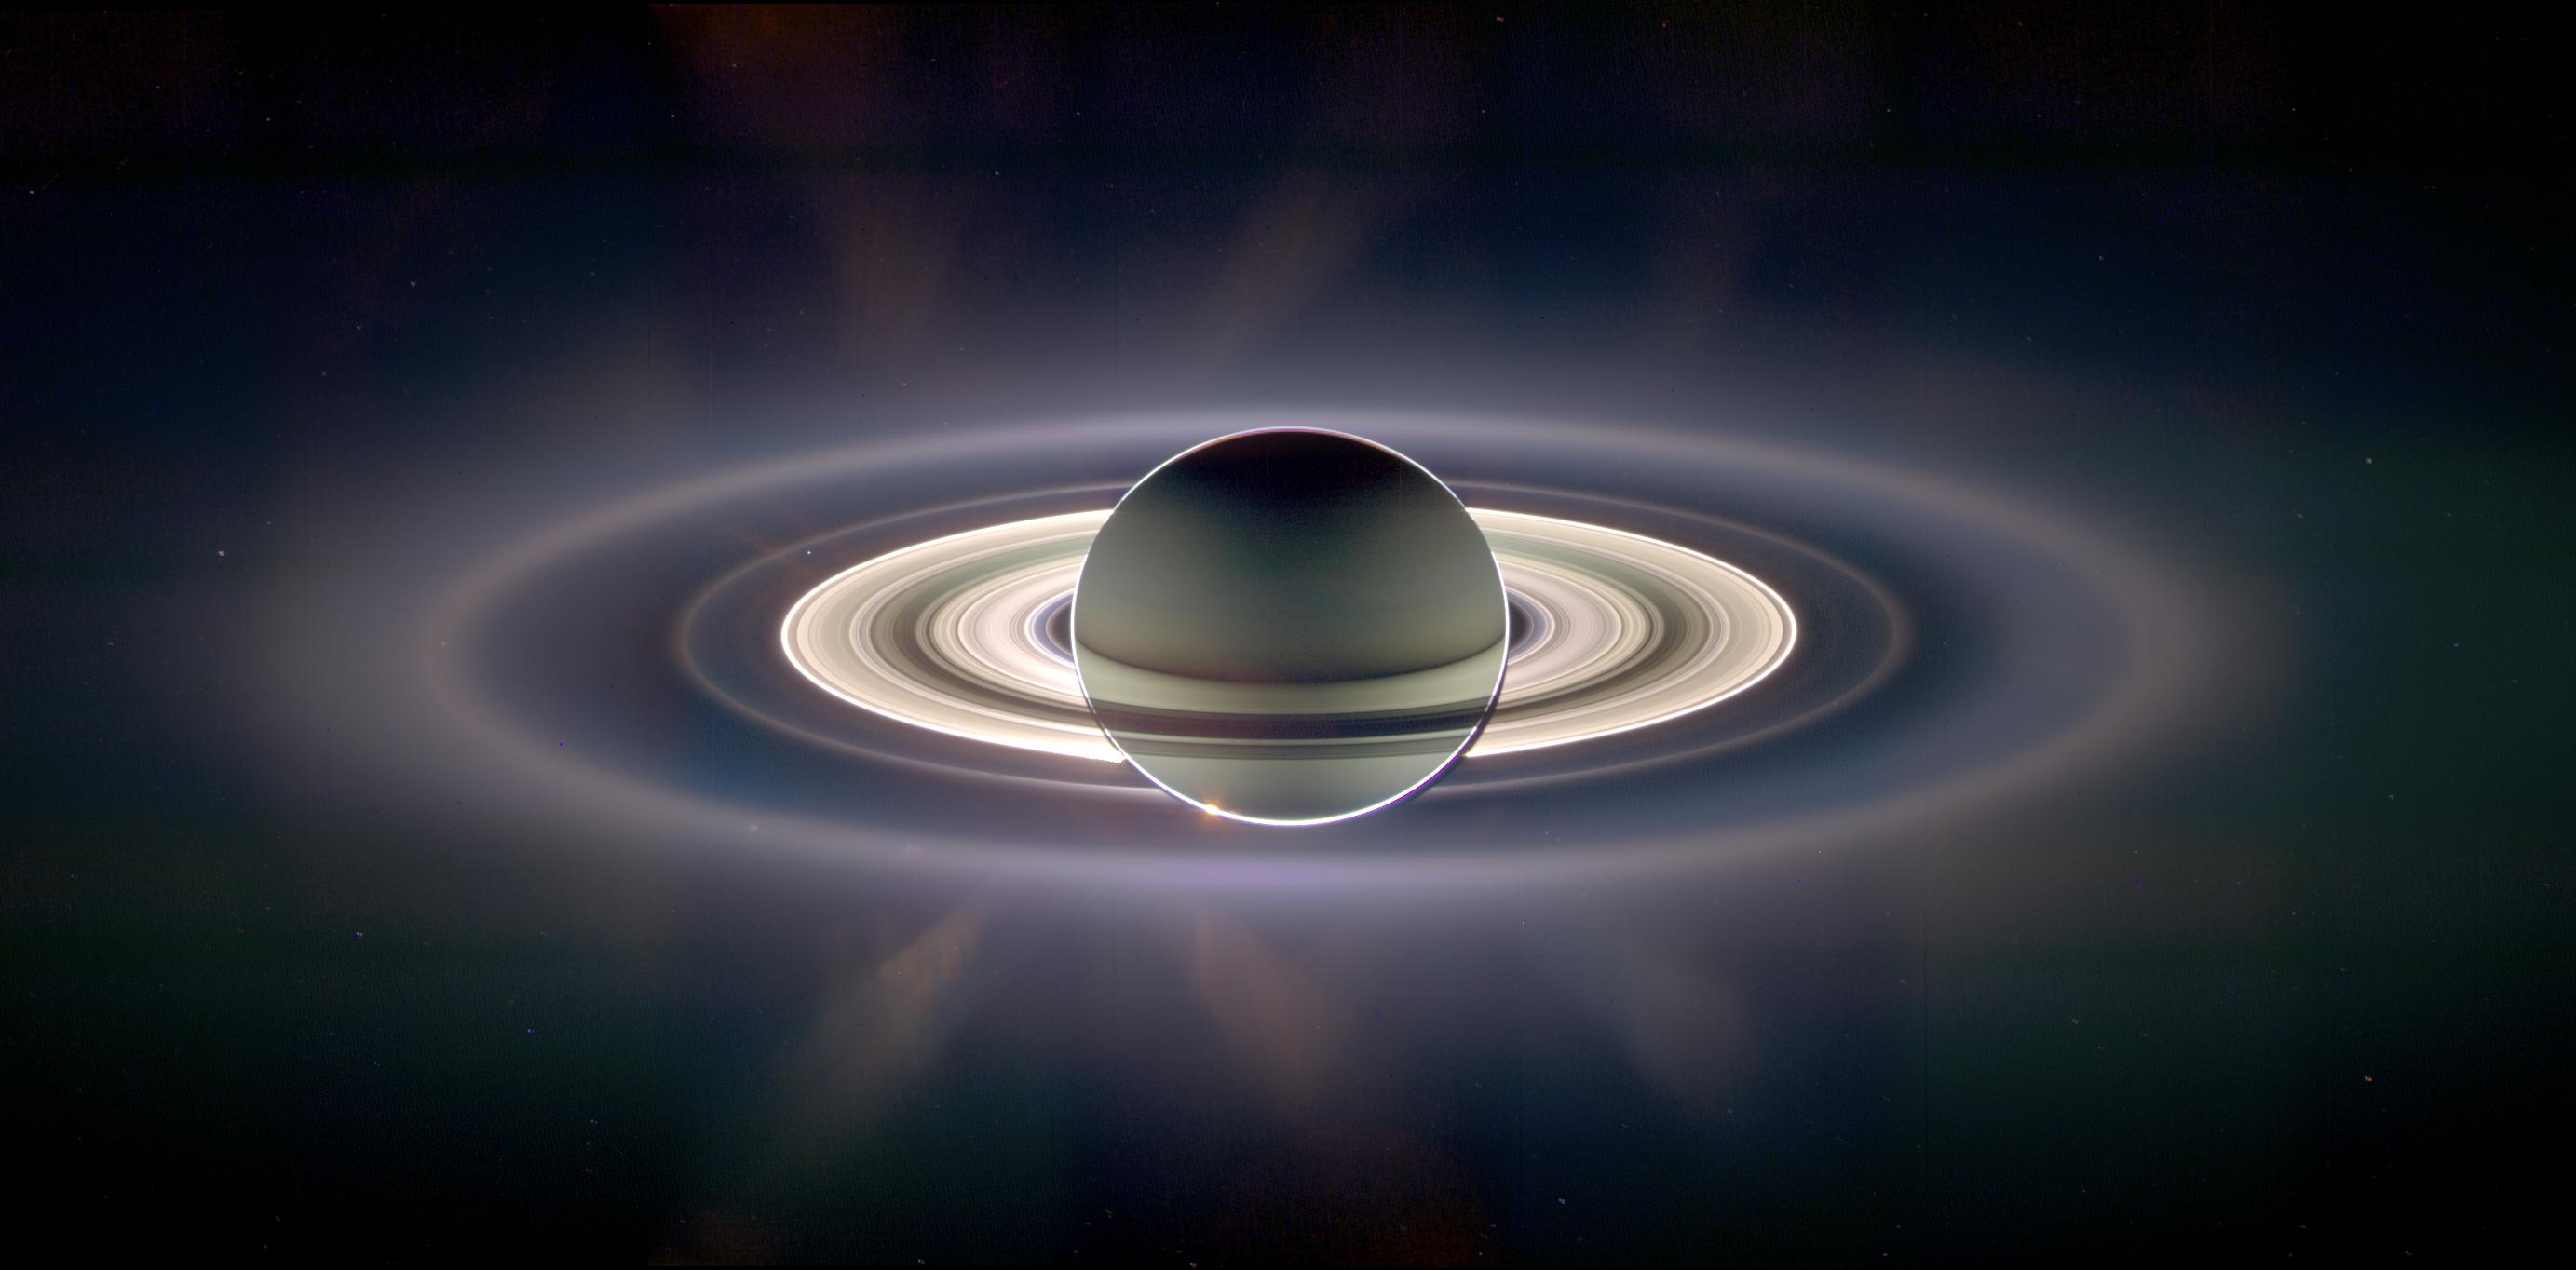 Color-exagerated view of Saturn and its rings